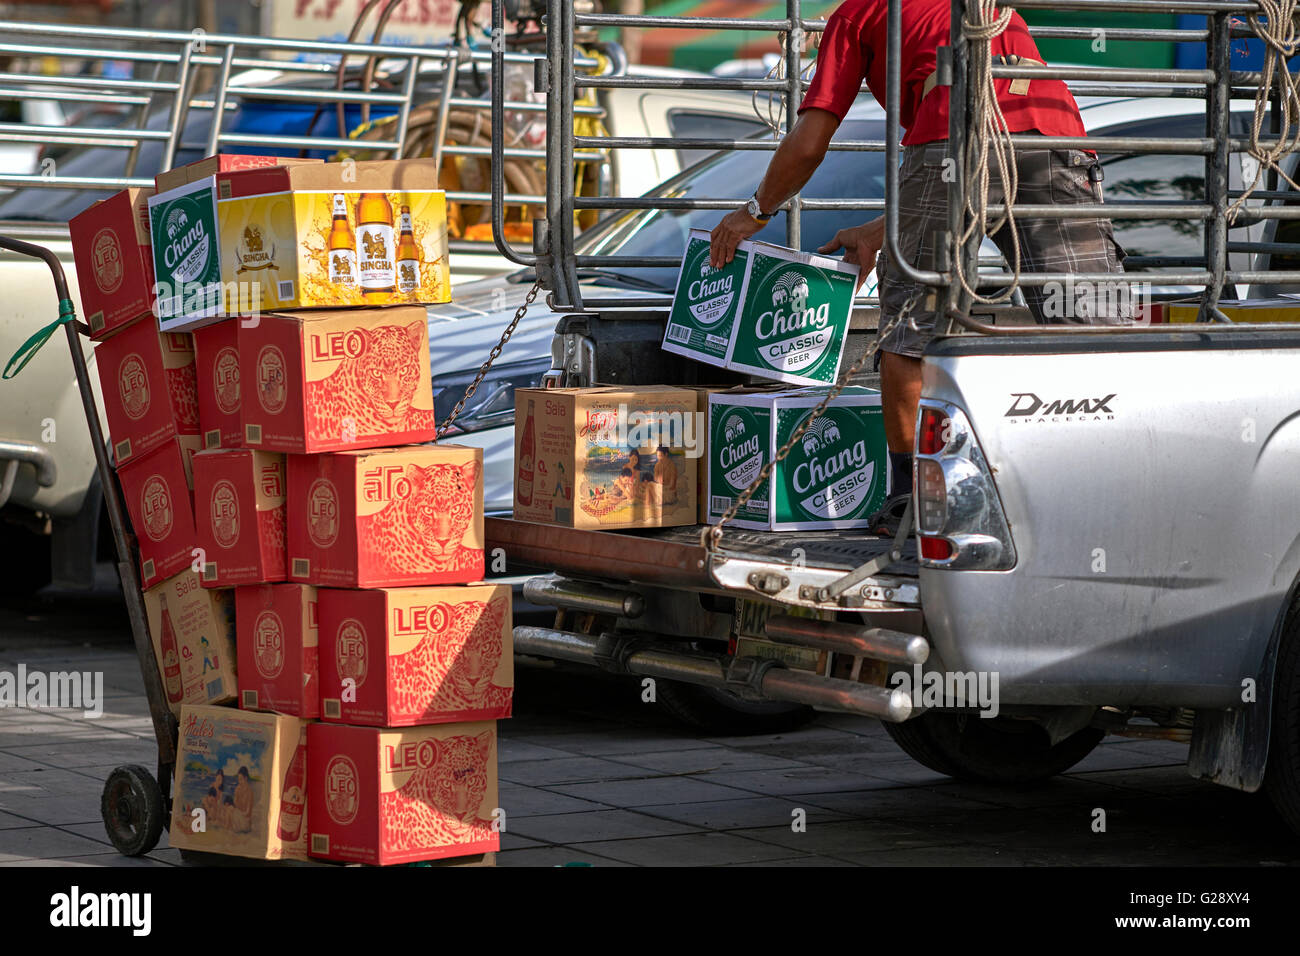 Man loading assorted cases of traditional Thai wines and beer. Thailand S. E. Asia Stock Photo